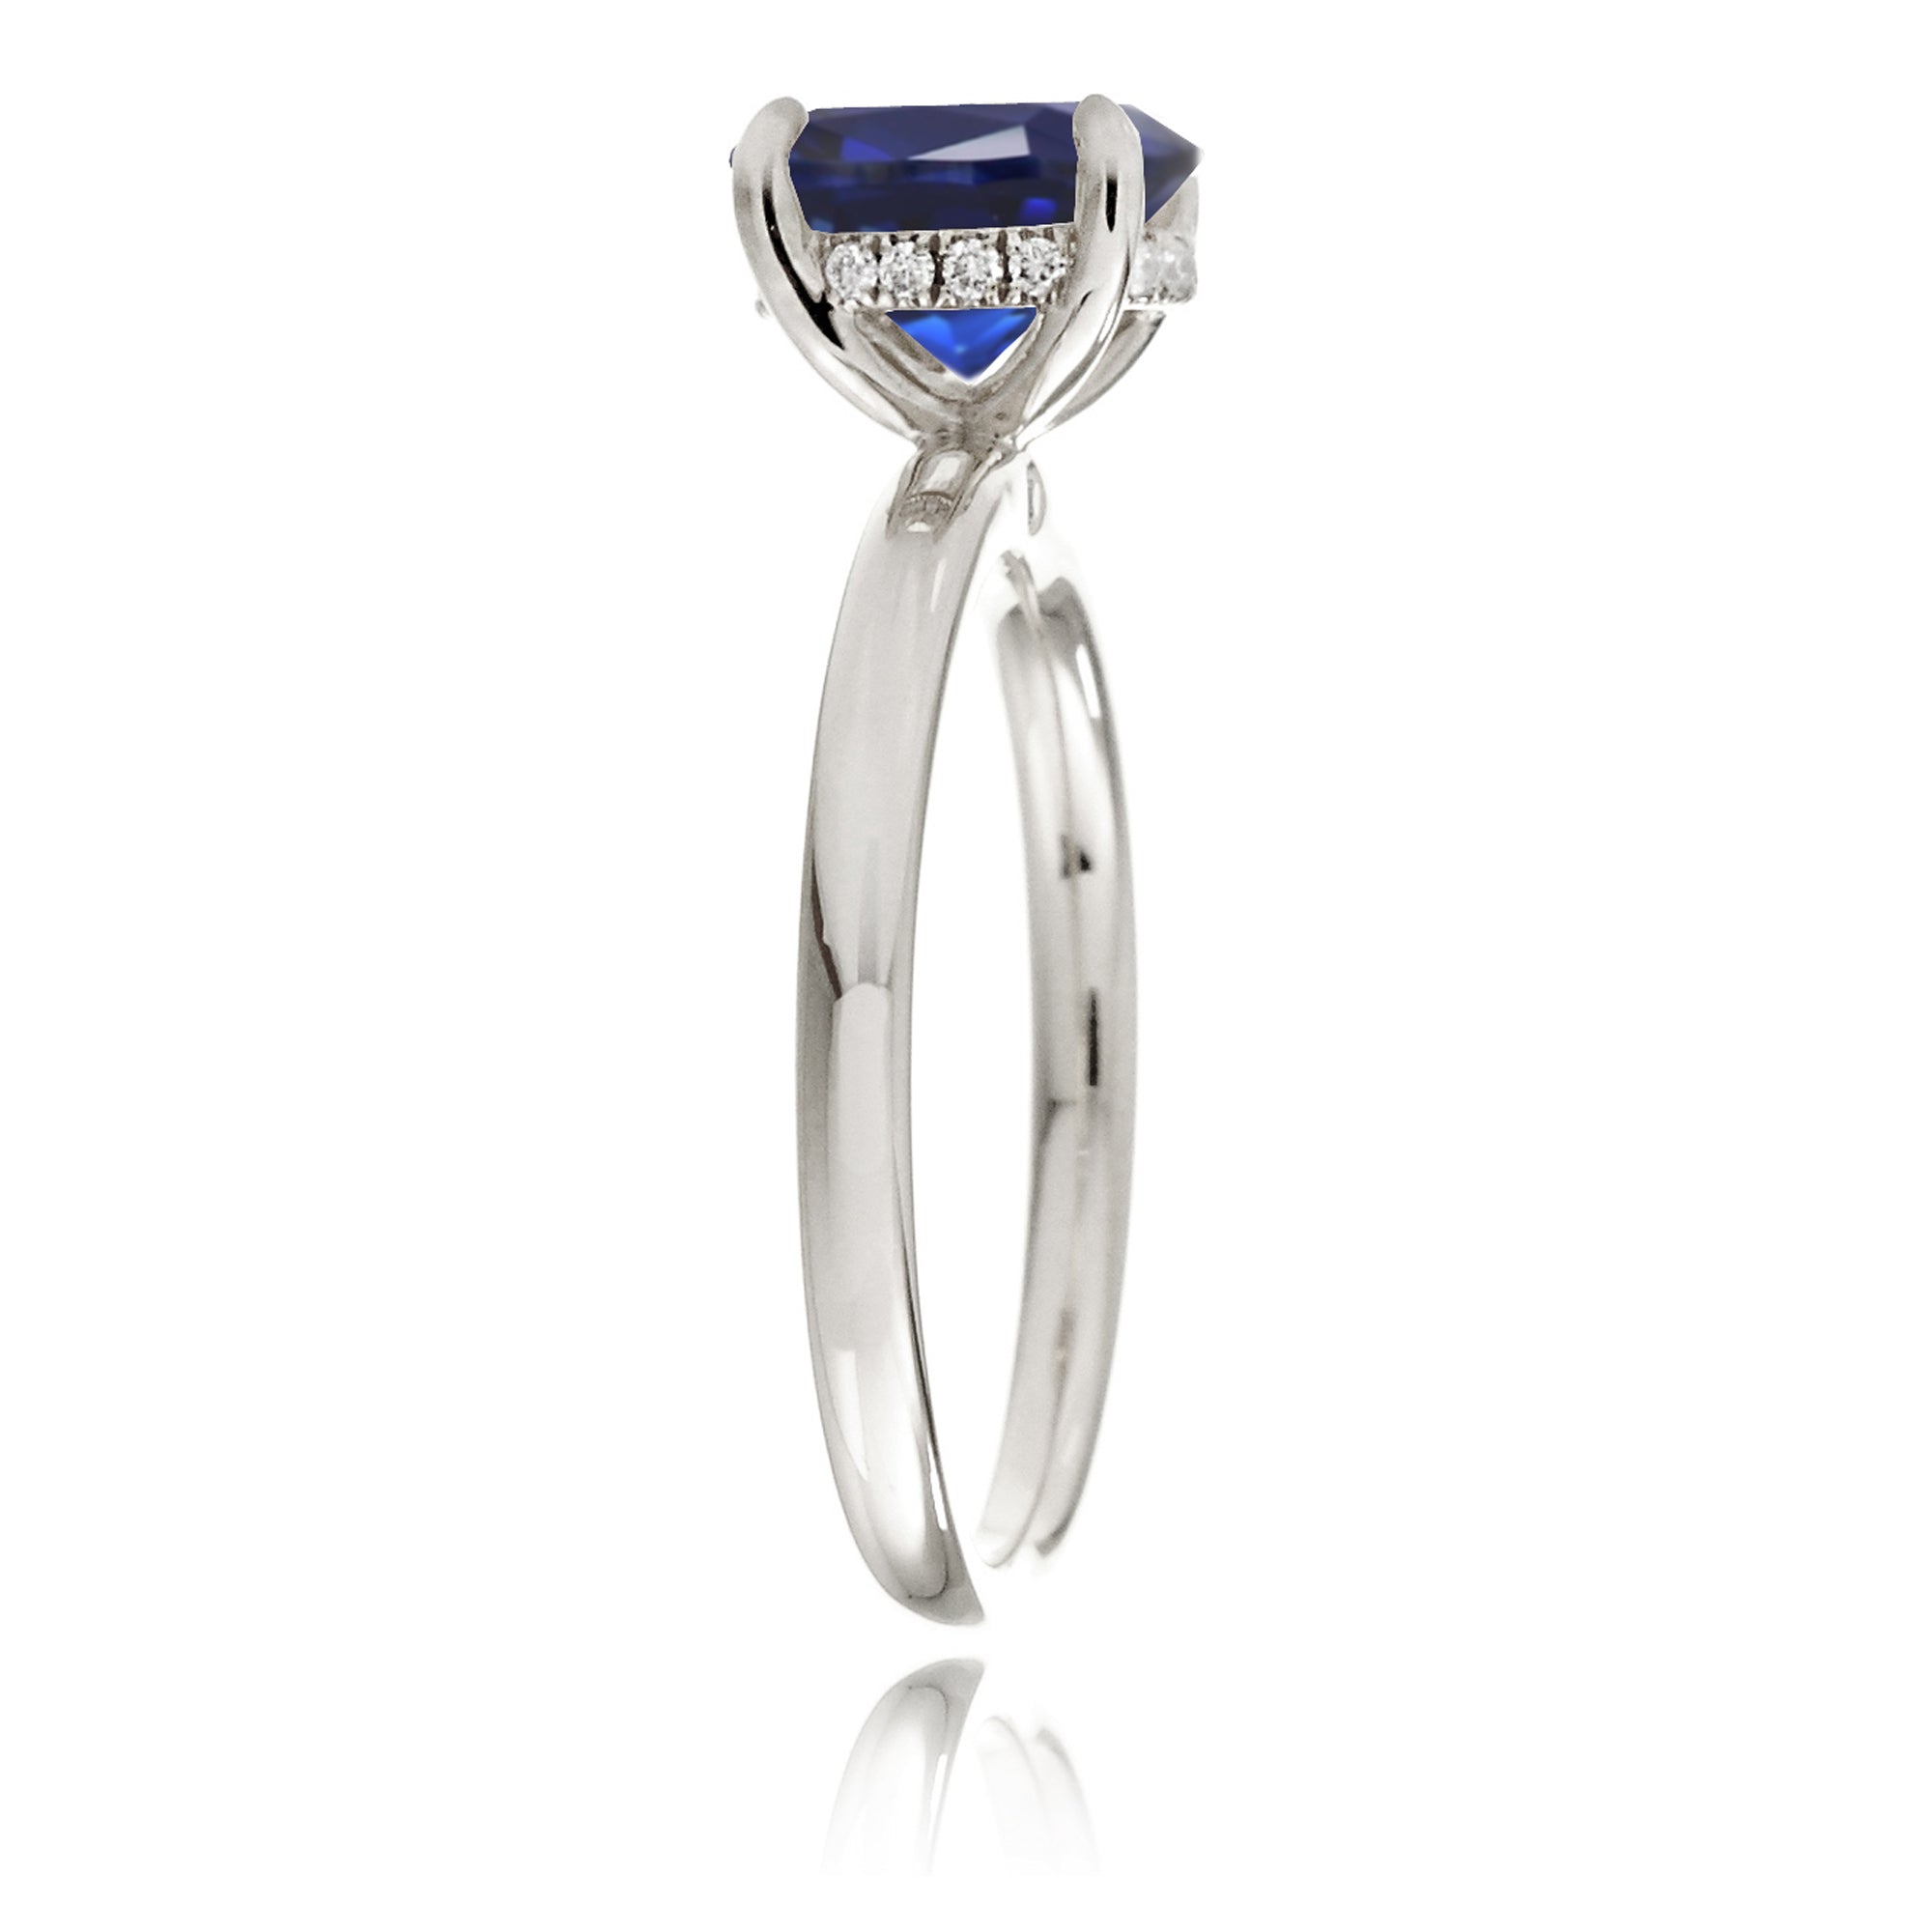 Oval cut blue sapphire engagement ring with a diamond hidden halo and solid band white gold